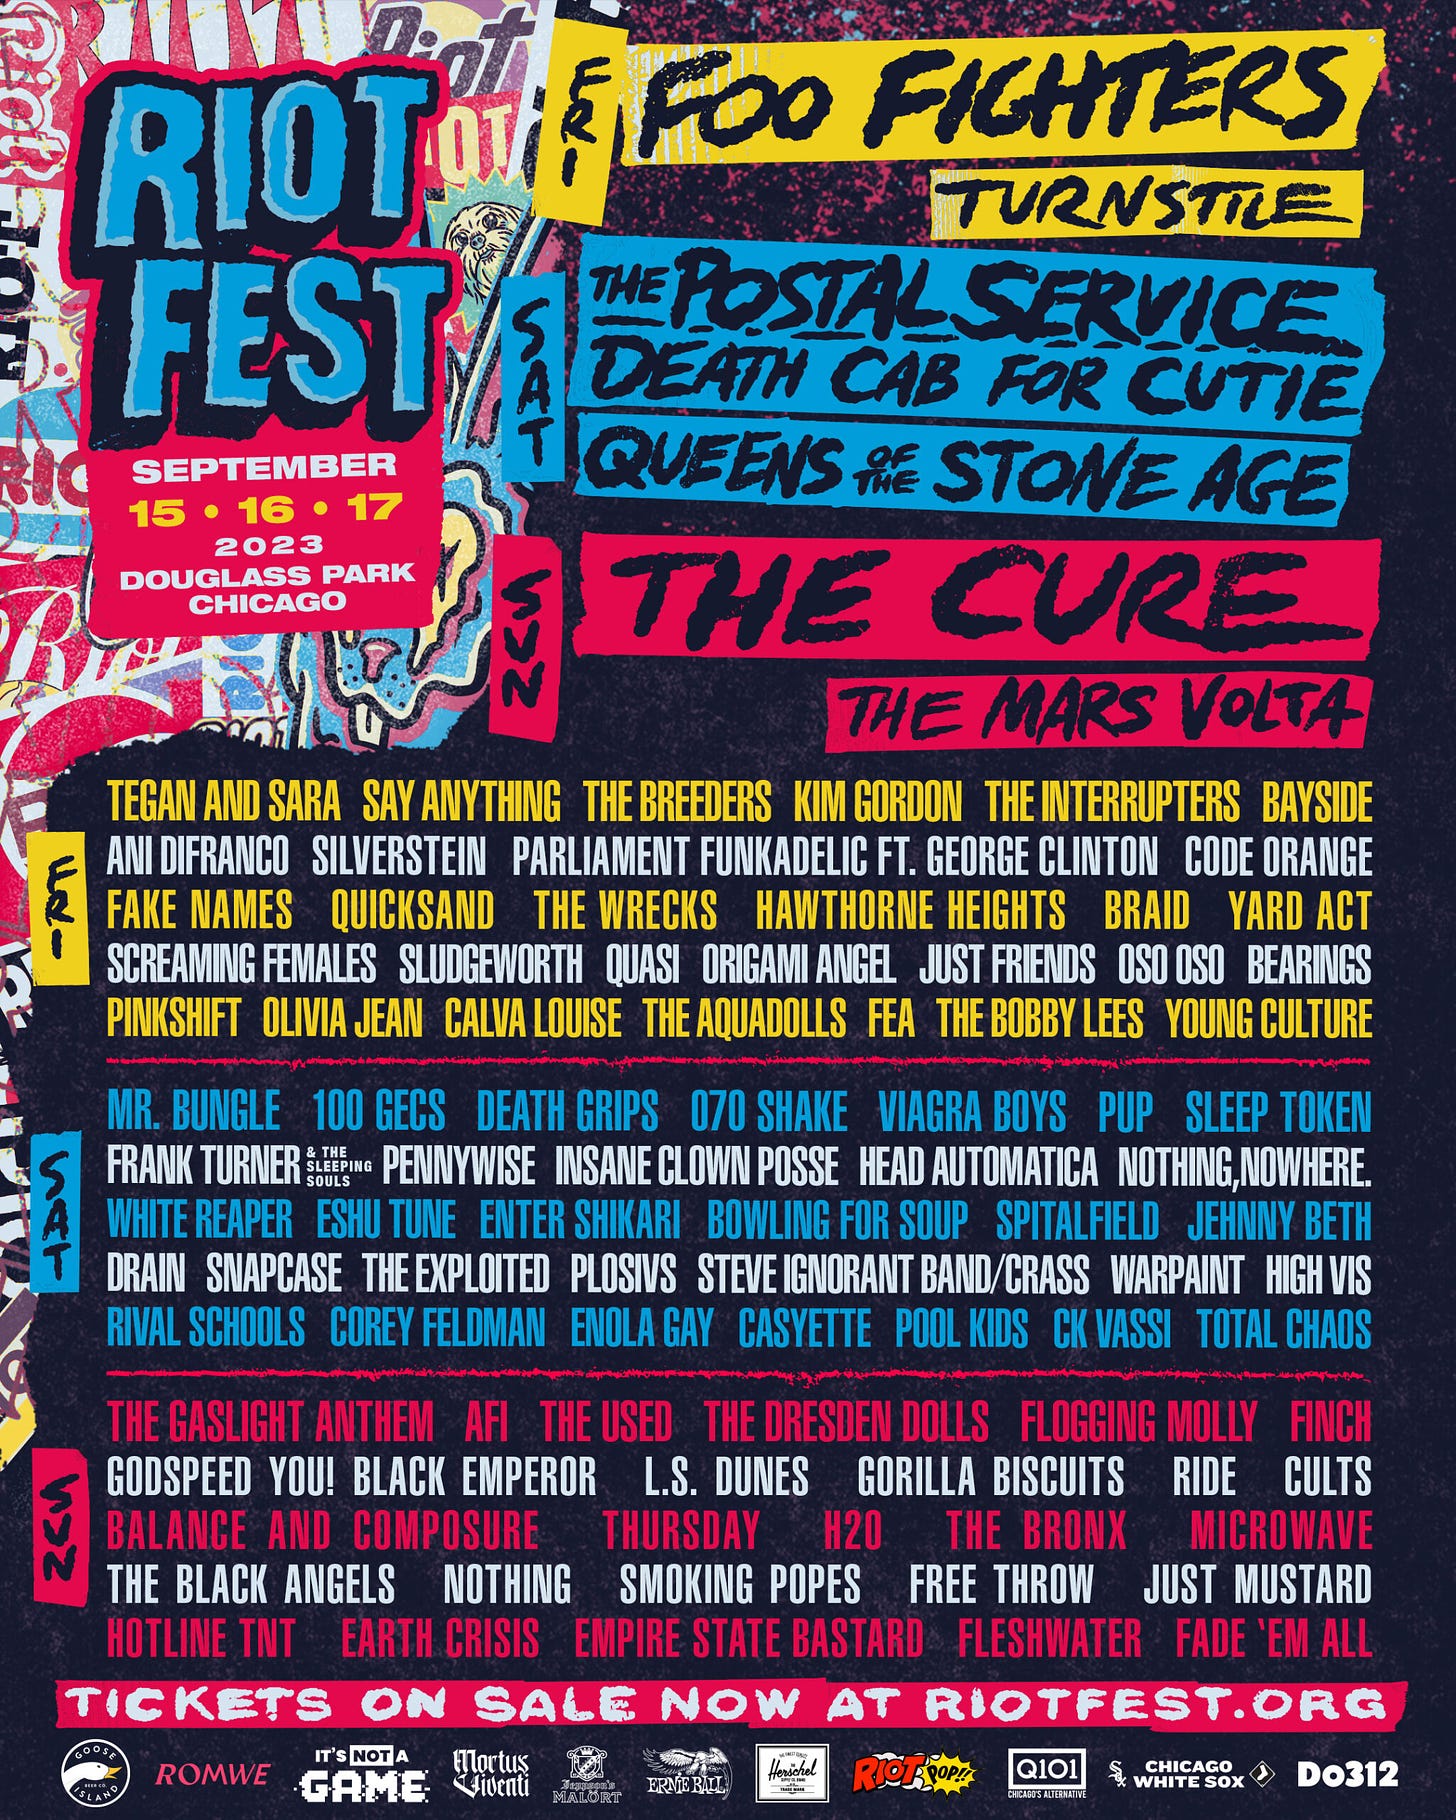 The Riot Fest 2023 Lineup Is Here - Riot Fest